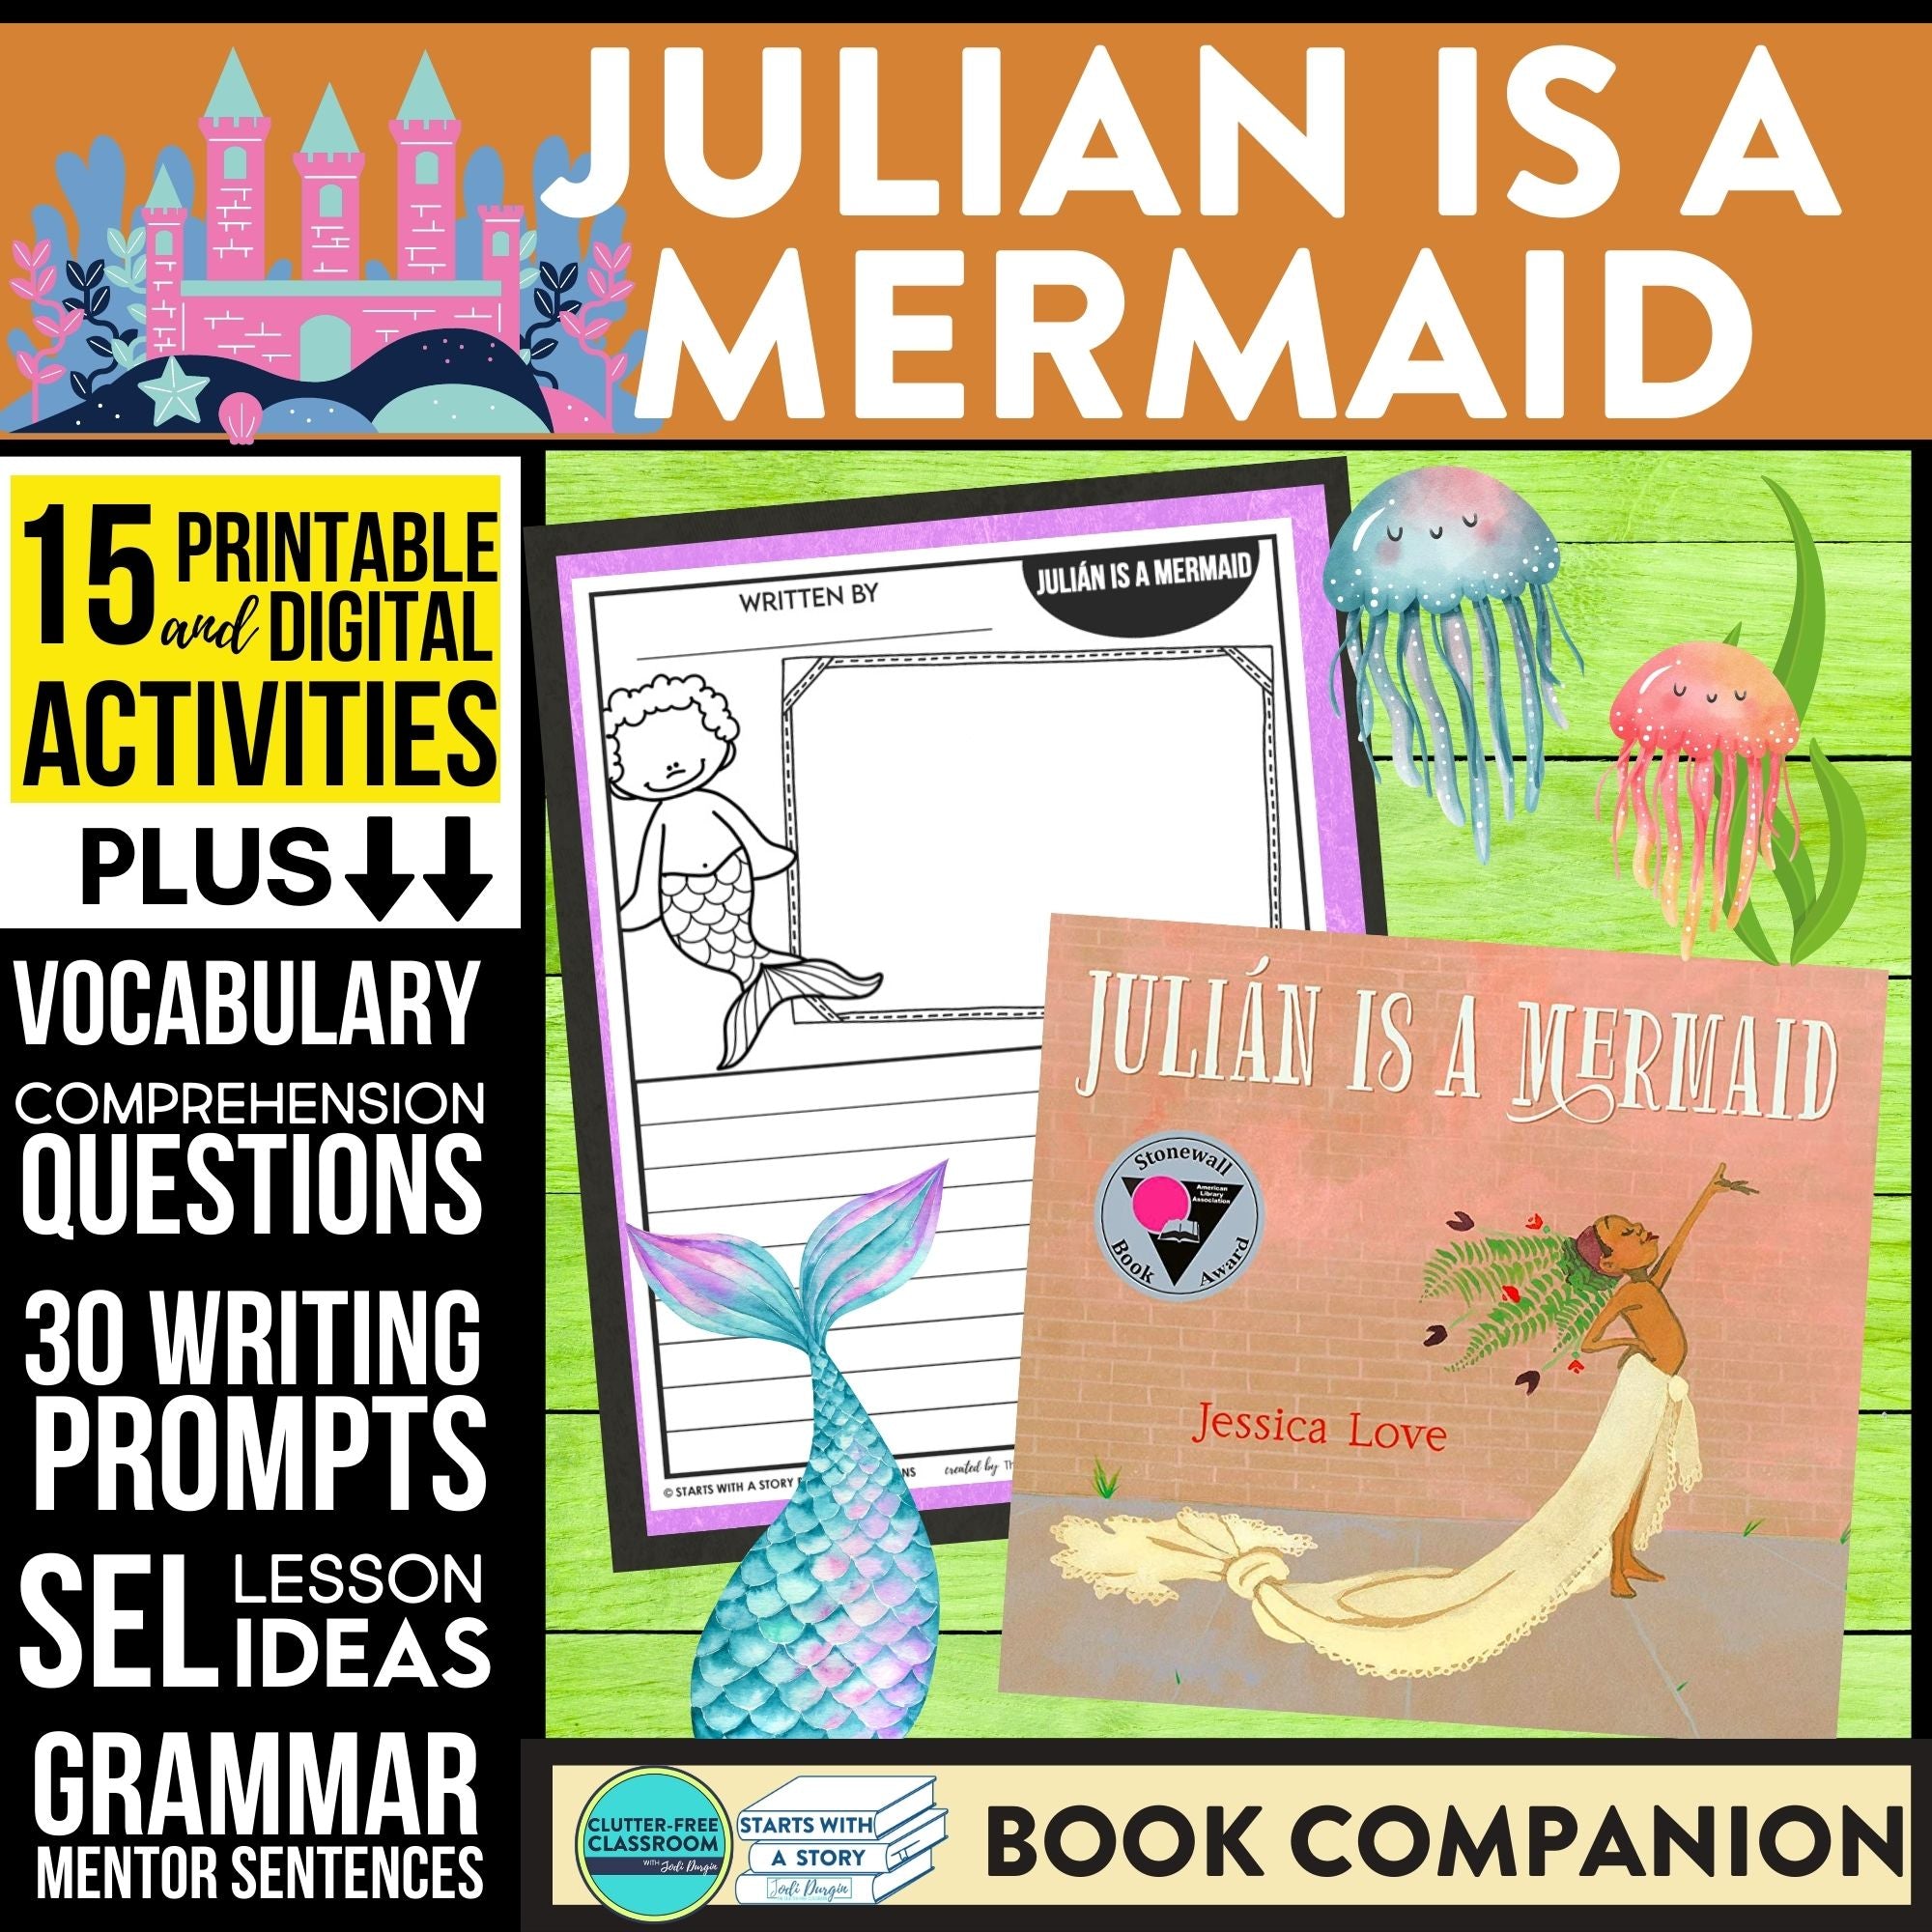 JULIAN IS A MERMAID activities and lesson plan ideas